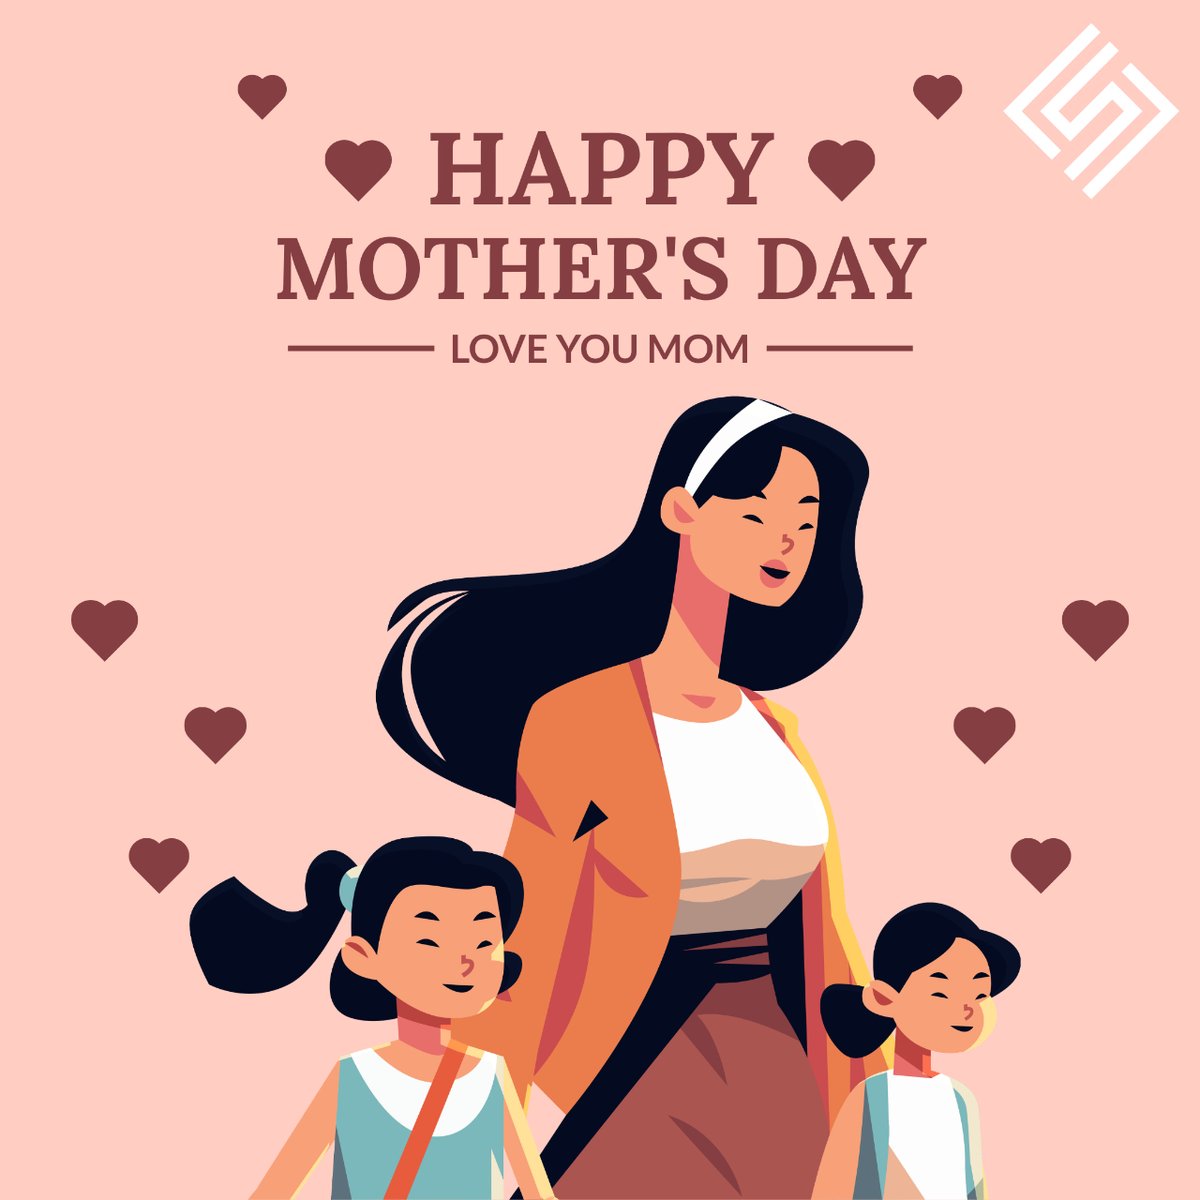 Happy Mother's Day from ShipLeap! #shippingsoftware #shippingindustry #shippingnews #parcelshipping #parcels #parceldelivery #smartshipping #shipping #technology #automation